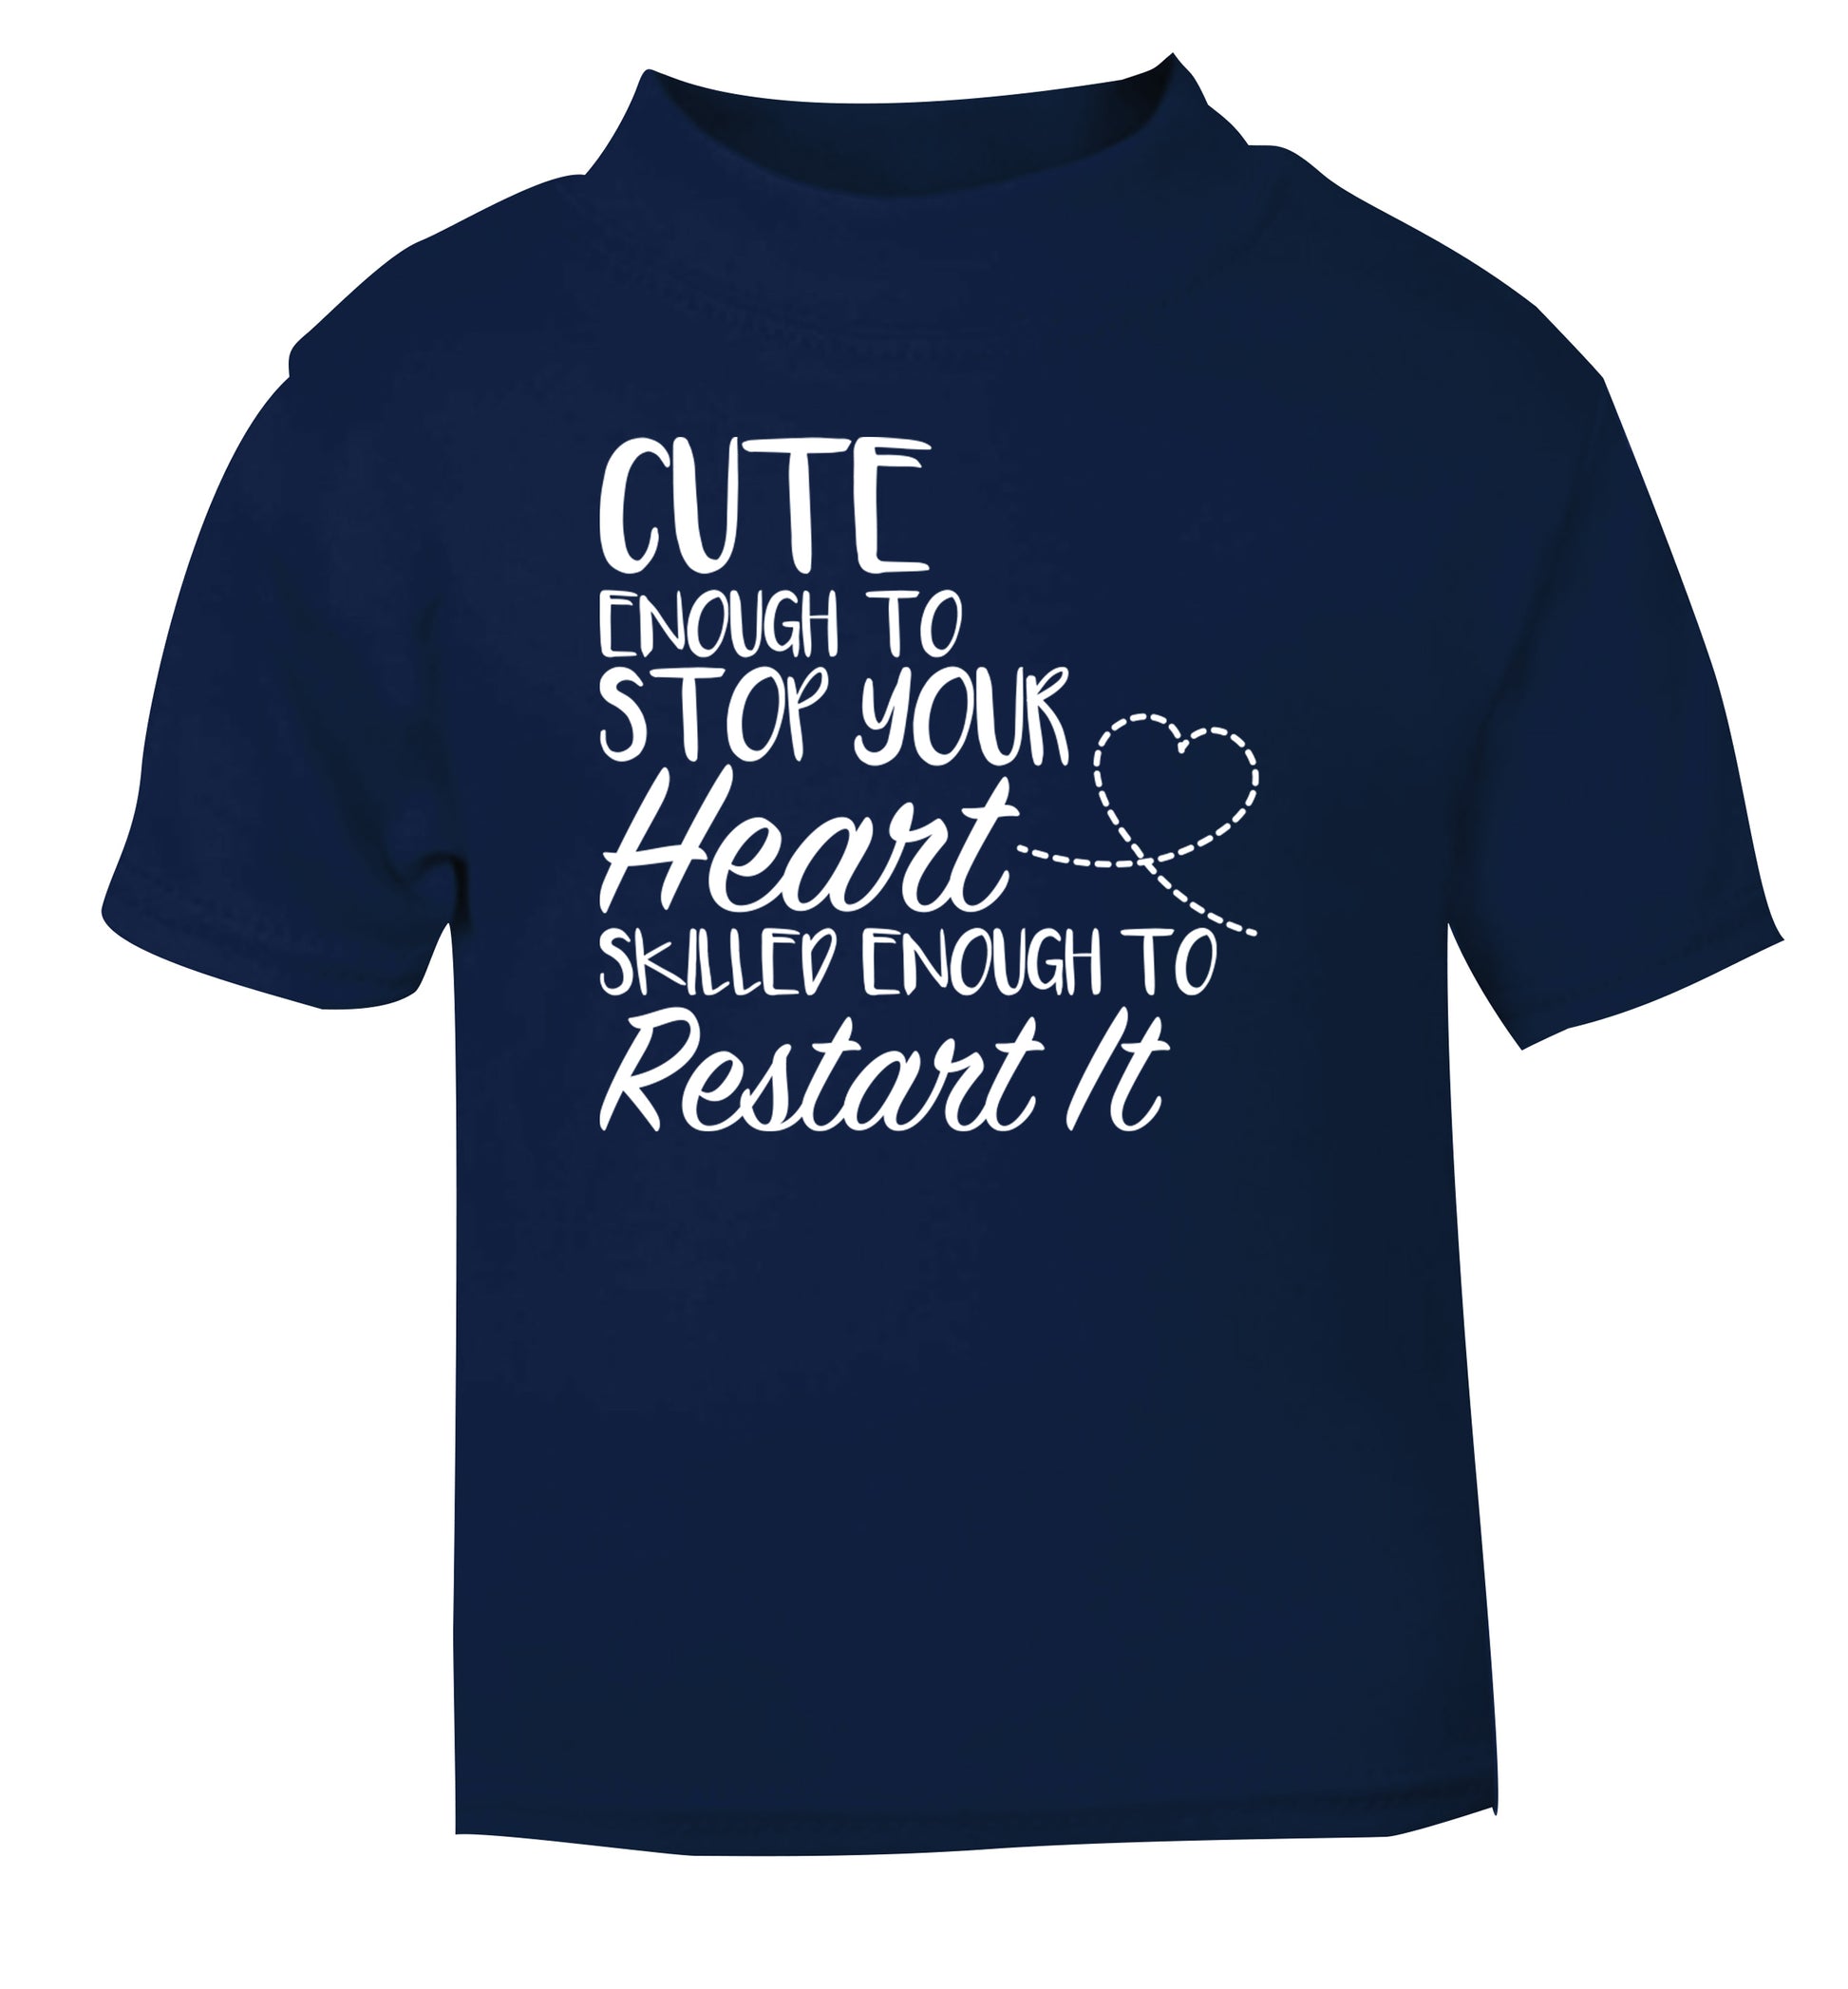 Cute enough to stop your heart skilled enough to restart it navy Baby Toddler Tshirt 2 Years